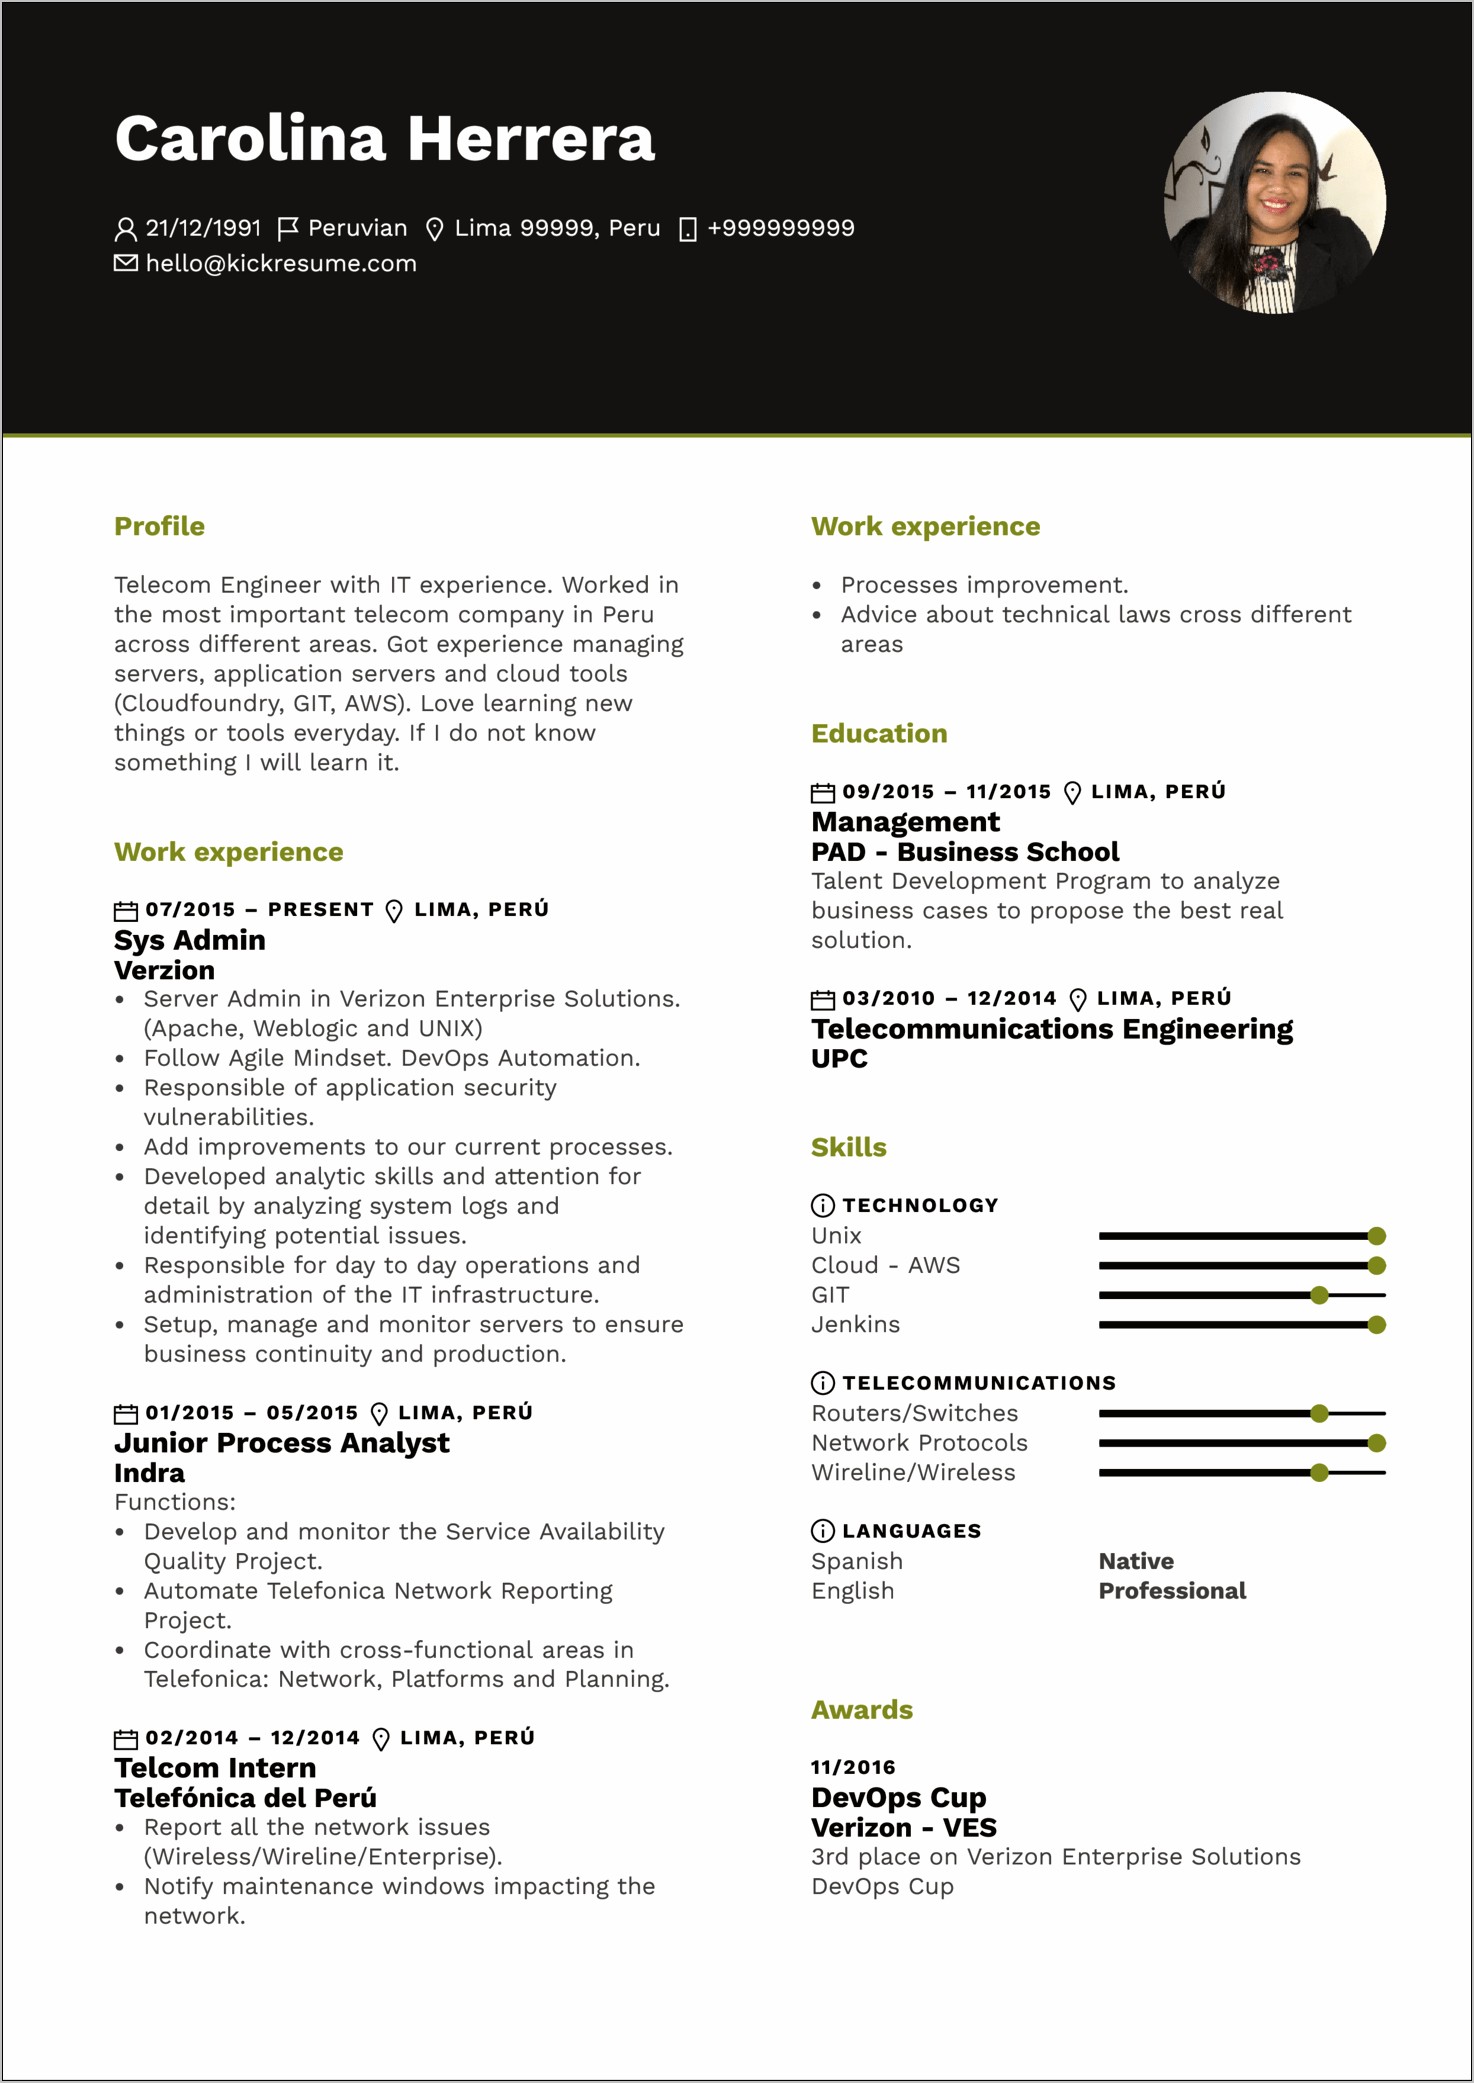 Resume To Get A Job At Amazon